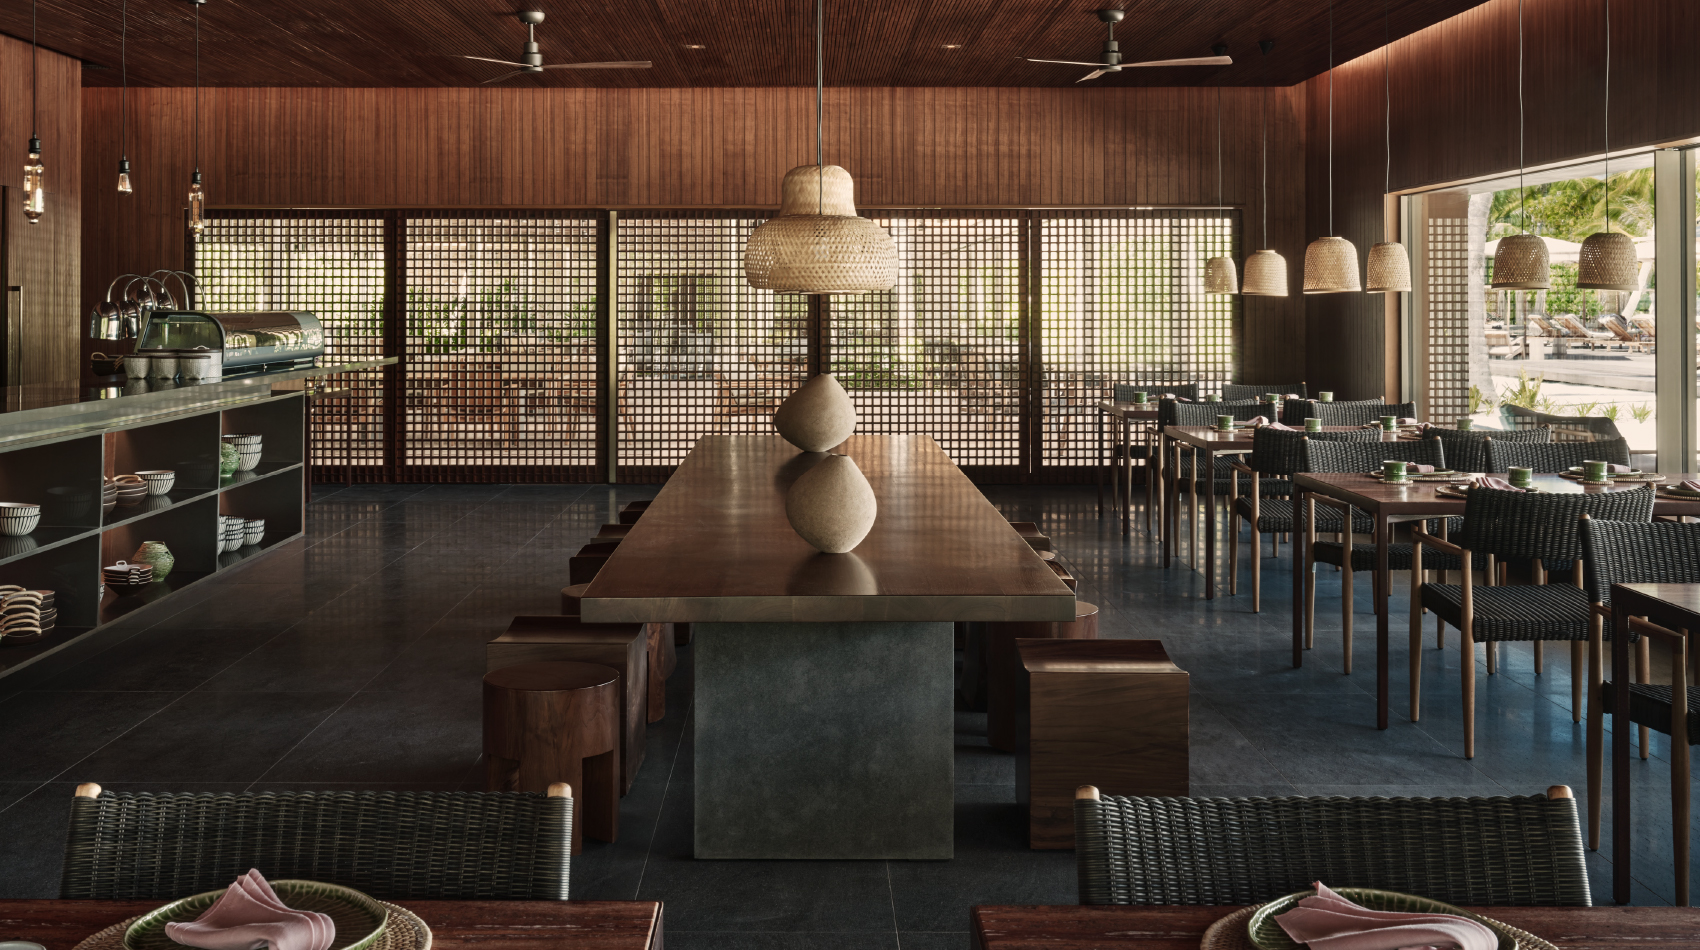 Luxurious dining spaces available at Patina Maldives